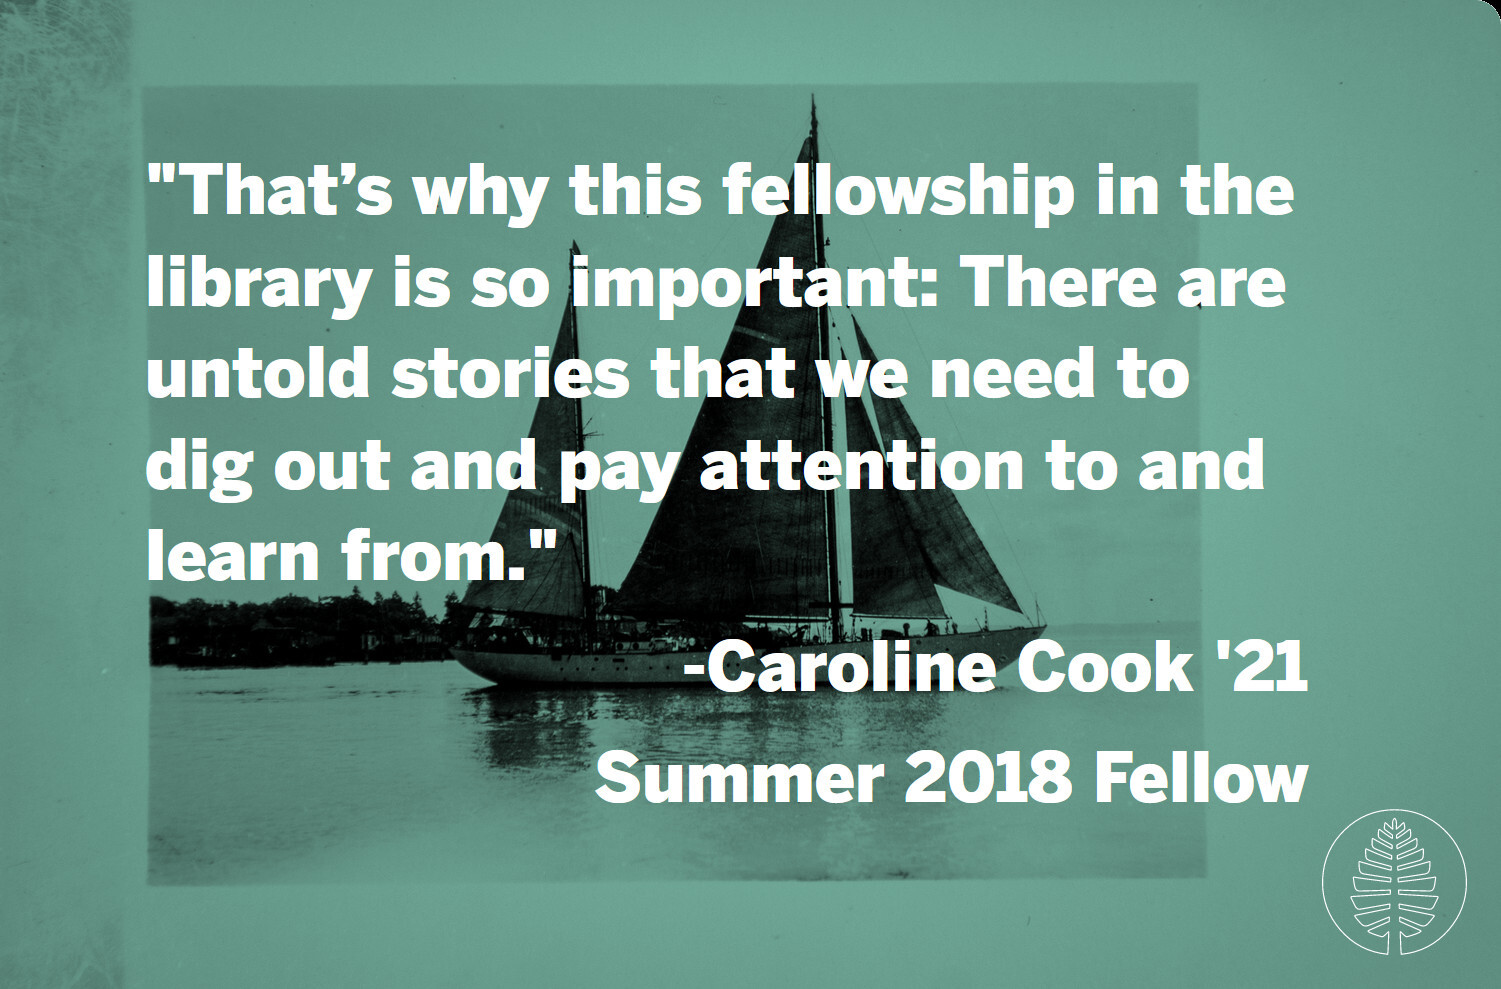 A quote against a background photo of a sailboat on the water. "That’s why this fellowship in the library is so important: There are untold stories that we need to dig out and pay attention to and learn from." -Caroline Cook '21, Summer 2018 Fellow